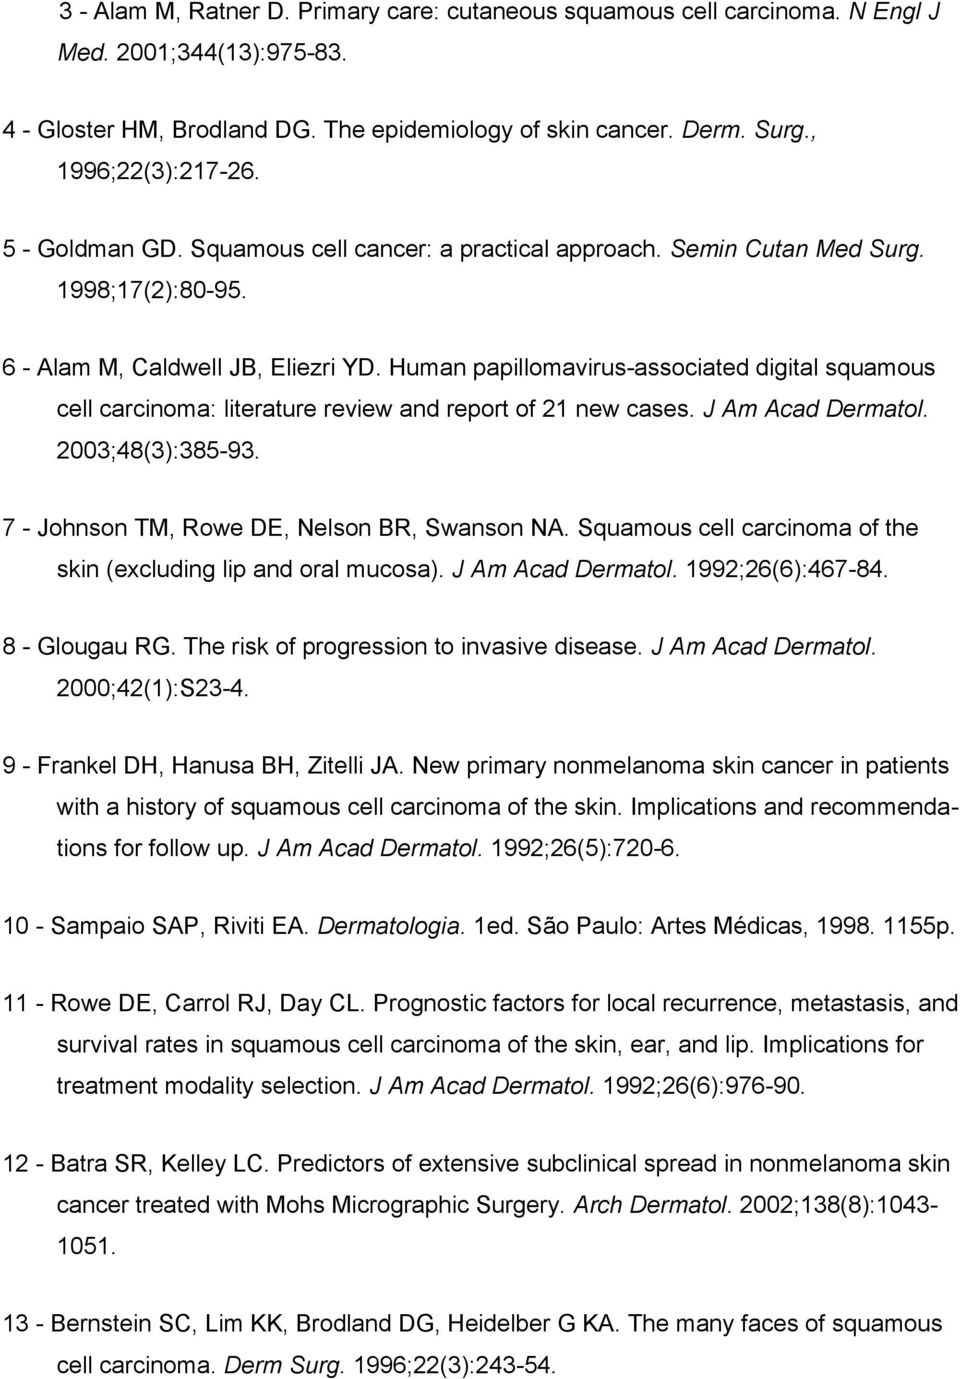 Human papillomavirus-associated digital squamous cell carcinoma: literature review and report of 21 new cases. J Am Acad Dermatol. 2003;48(3):385-93. 7 - Johnson TM, Rowe DE, Nelson BR, Swanson NA.